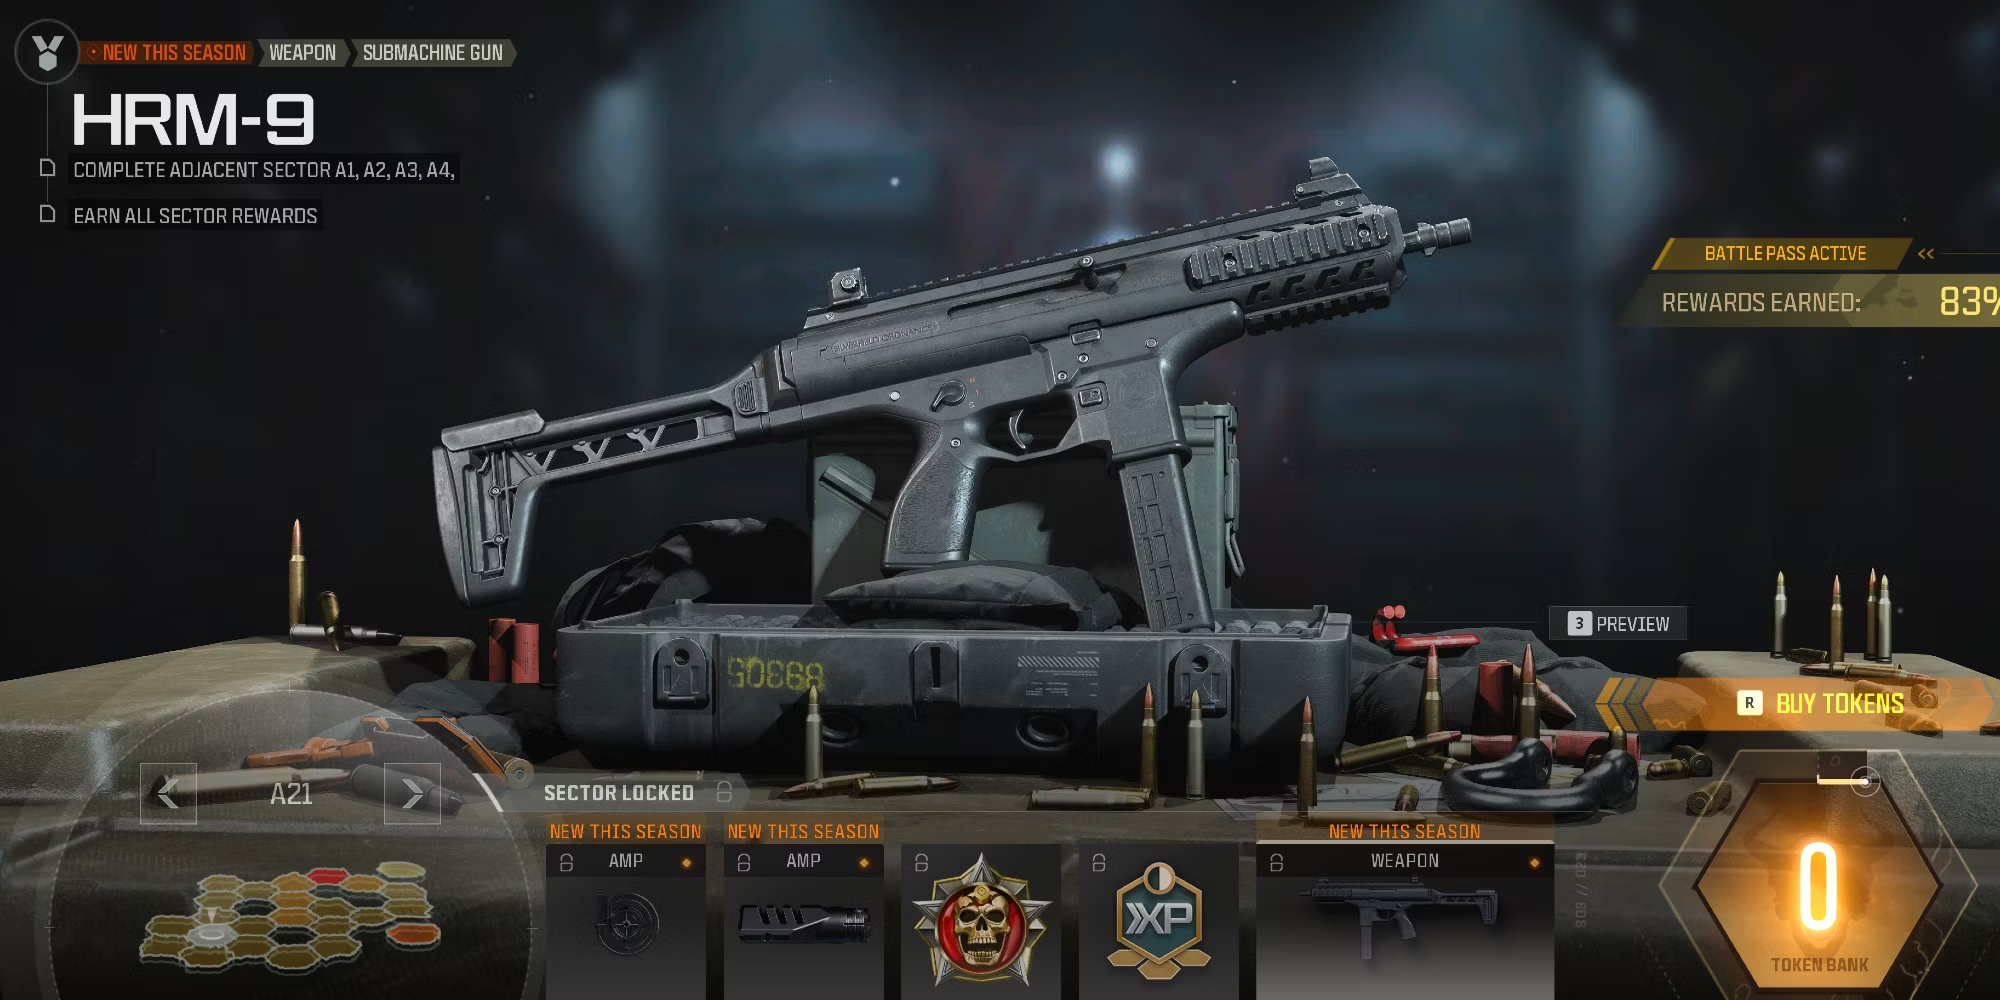 How to unlock hrm 9 in  Modern Warfare 3  (MW3 ) and Warzone